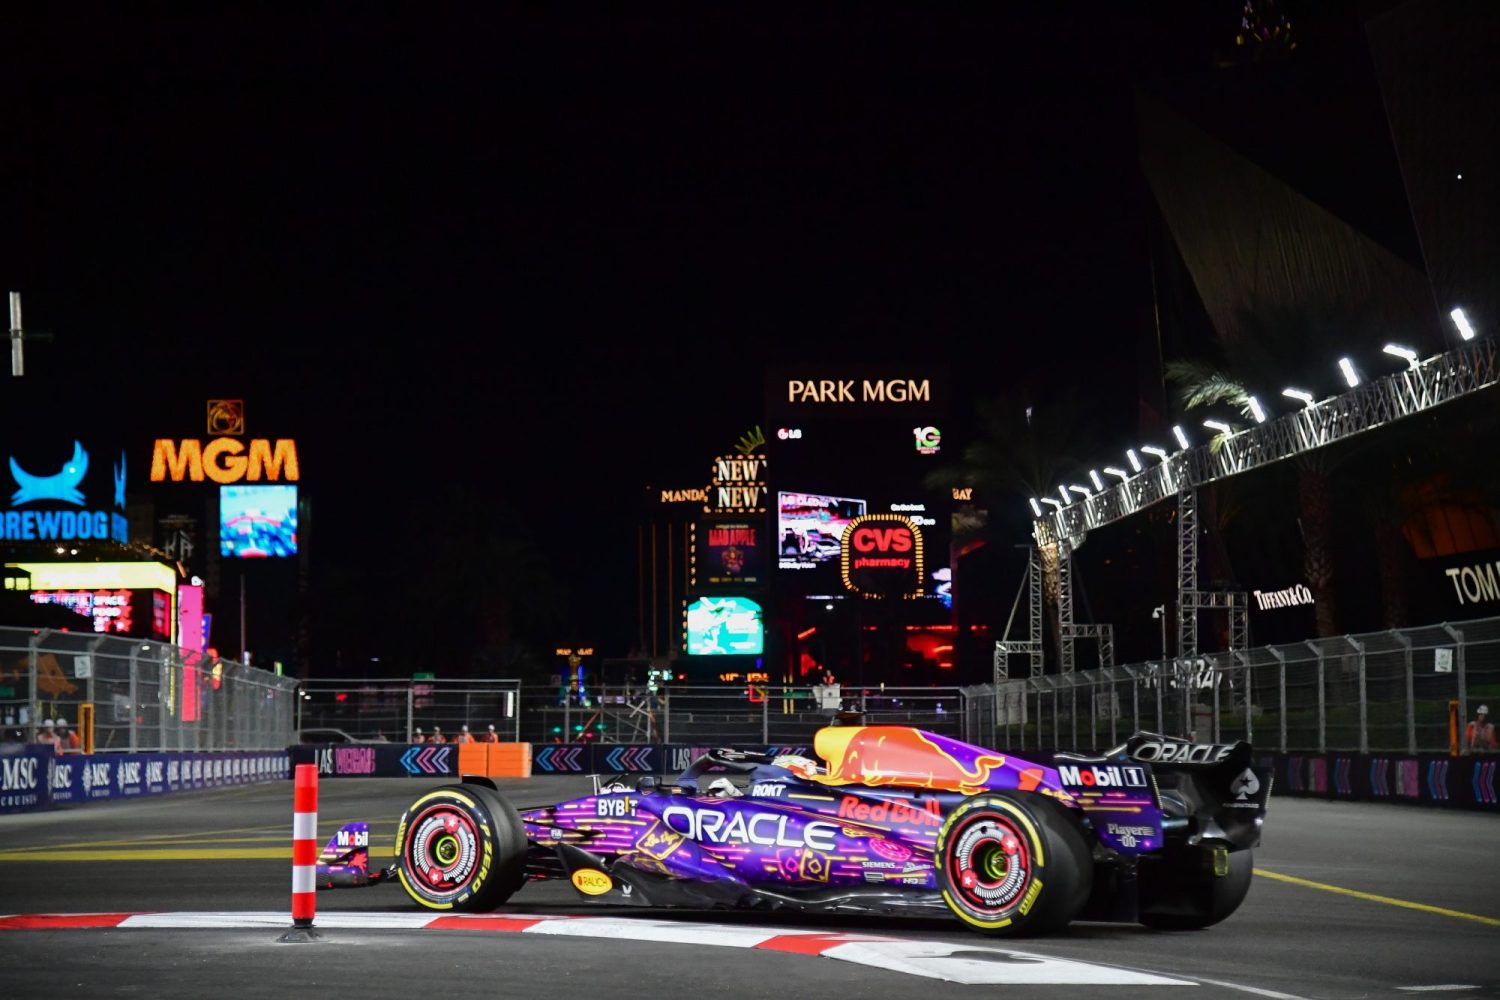 Red Bull Racing driver Max Verstappen of The Netherlands during the Las Vegas Grand Prix at Las Vegas Strip Circuit.